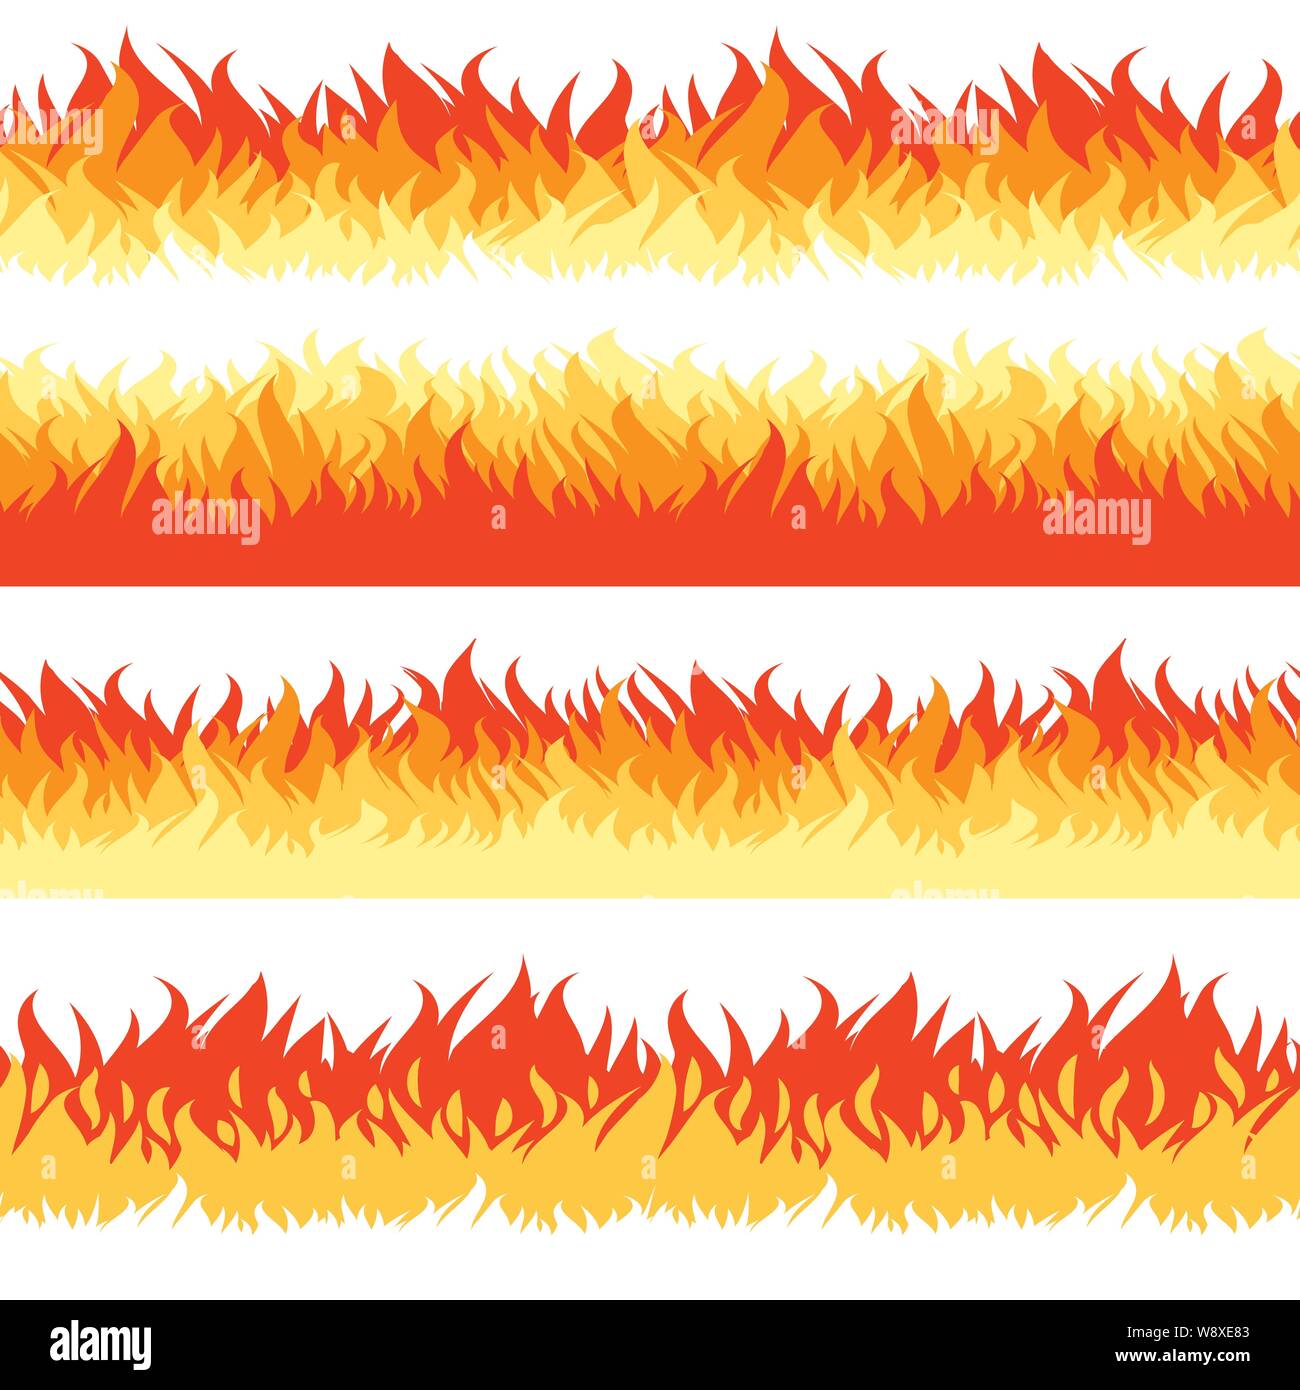 Red fire seamless borders Stock Vector